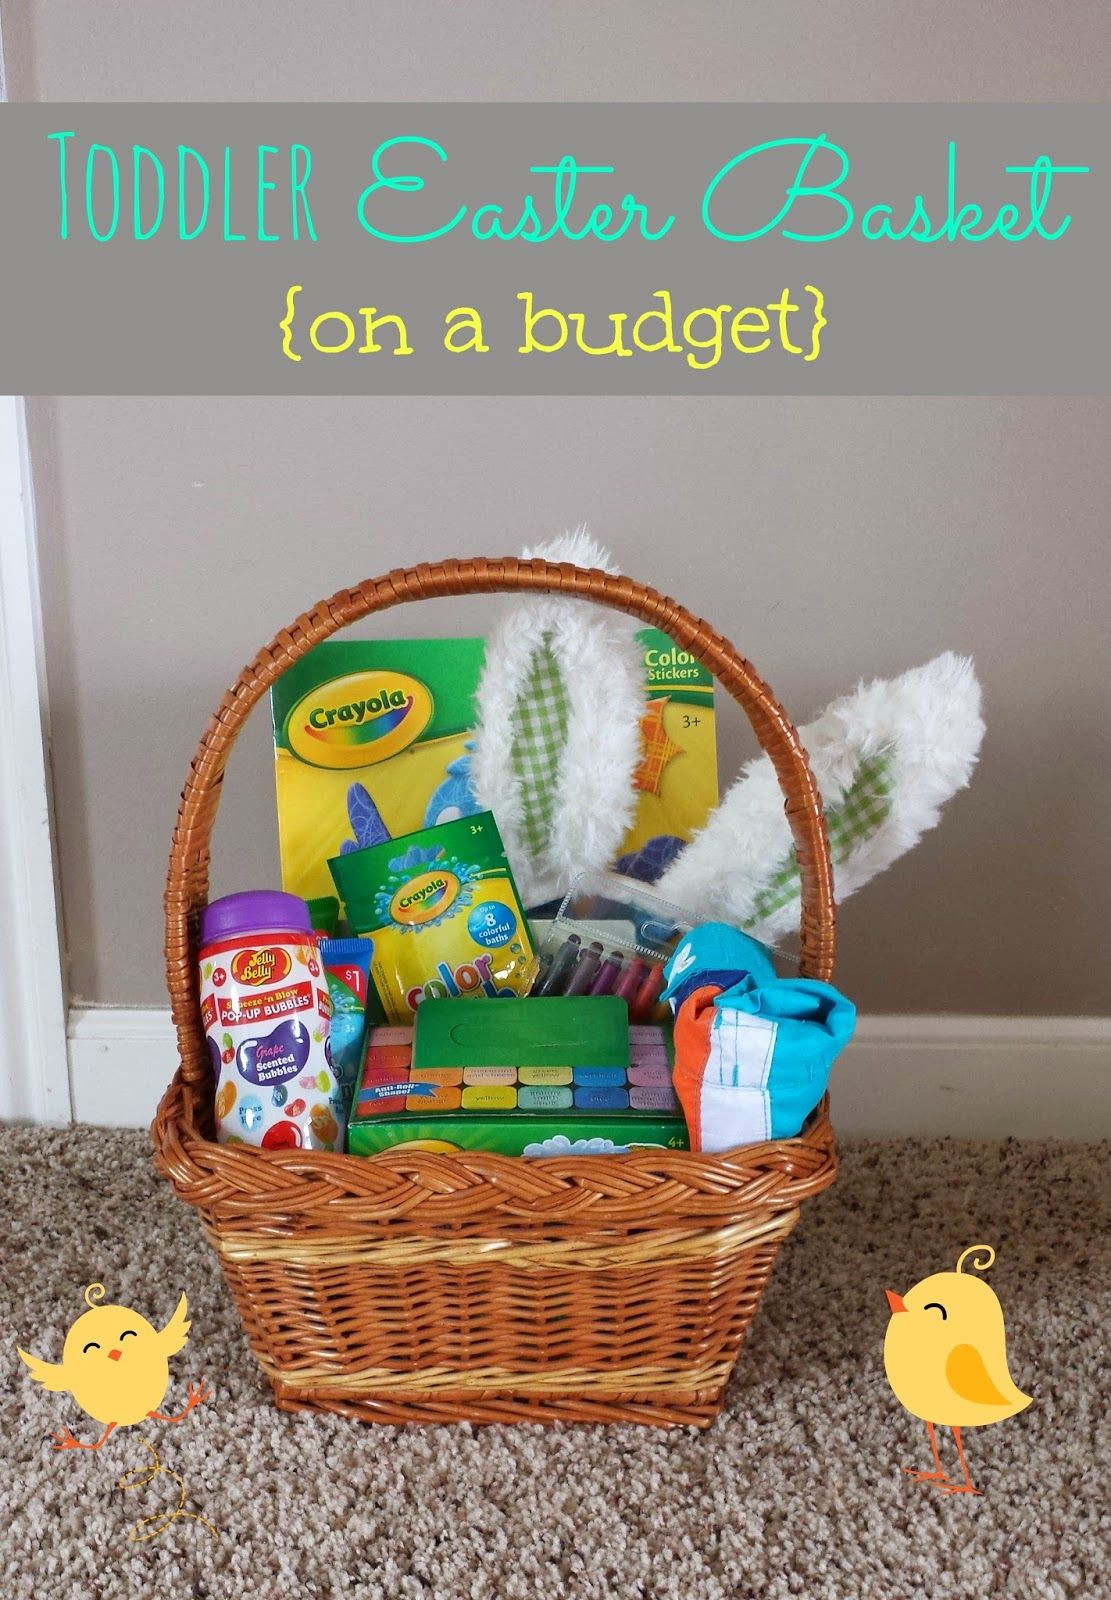 Gift Ideas For Baby'S First Easter
 Last year I did a post with ideas for Baby s First Easter